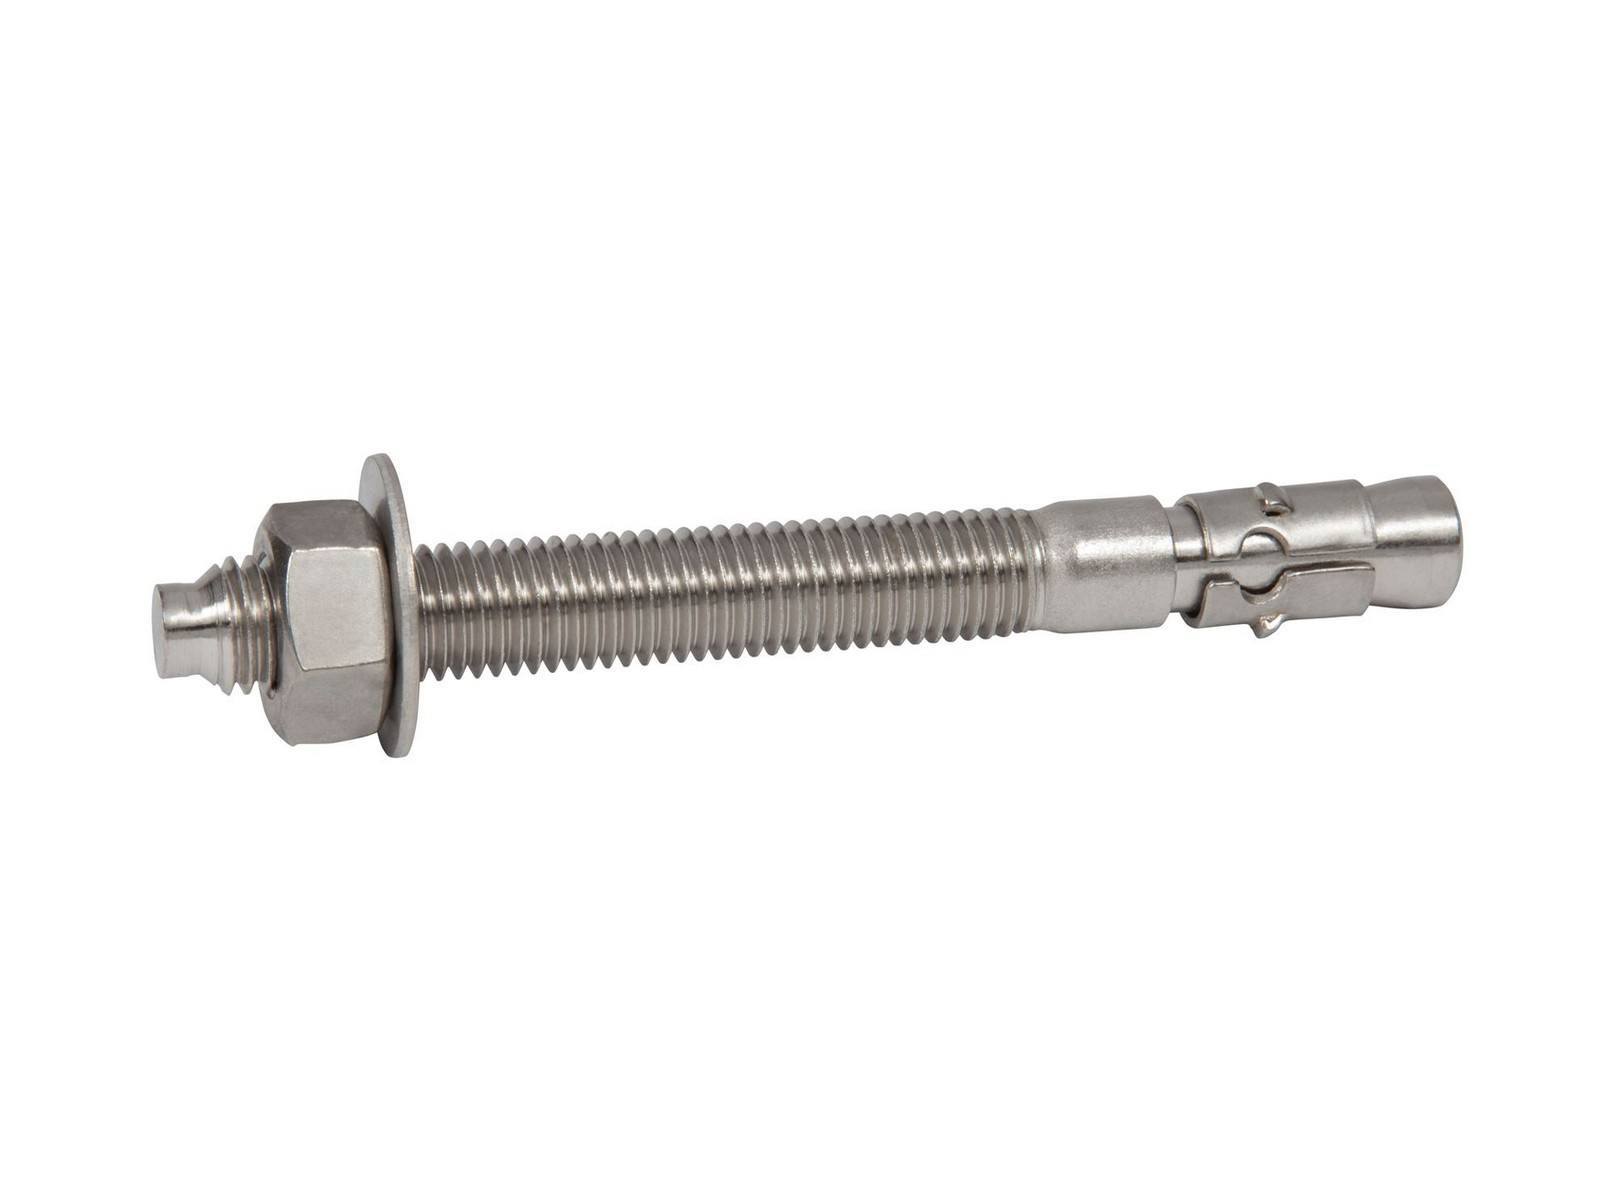 1 2 Stainless Steel Concrete Anchors